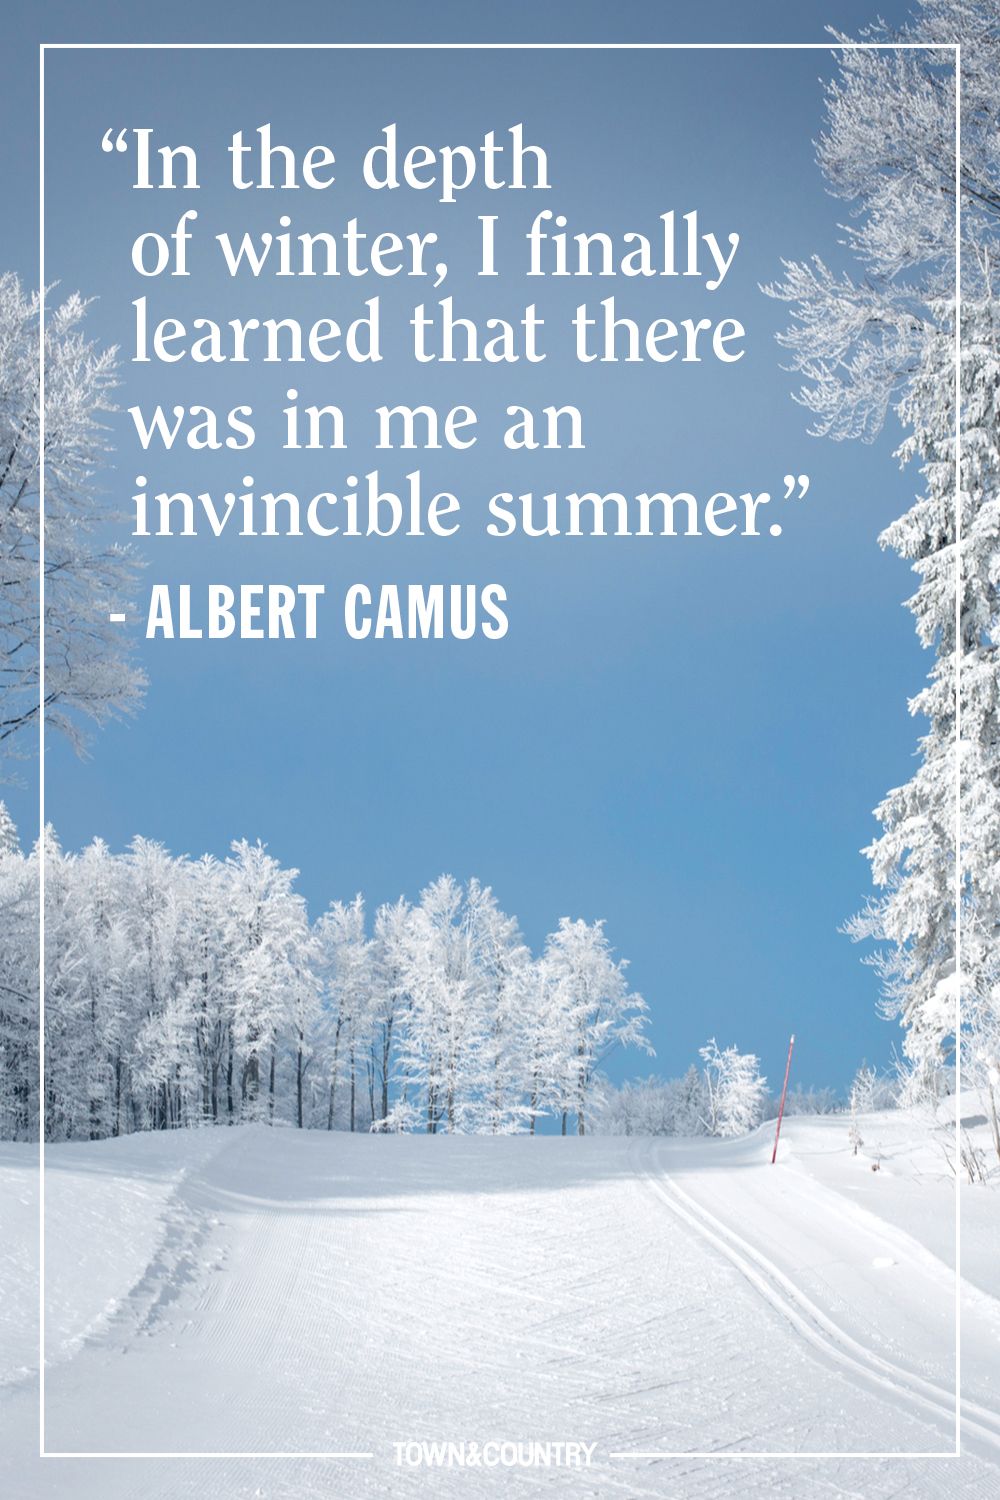 clever quotes about snow